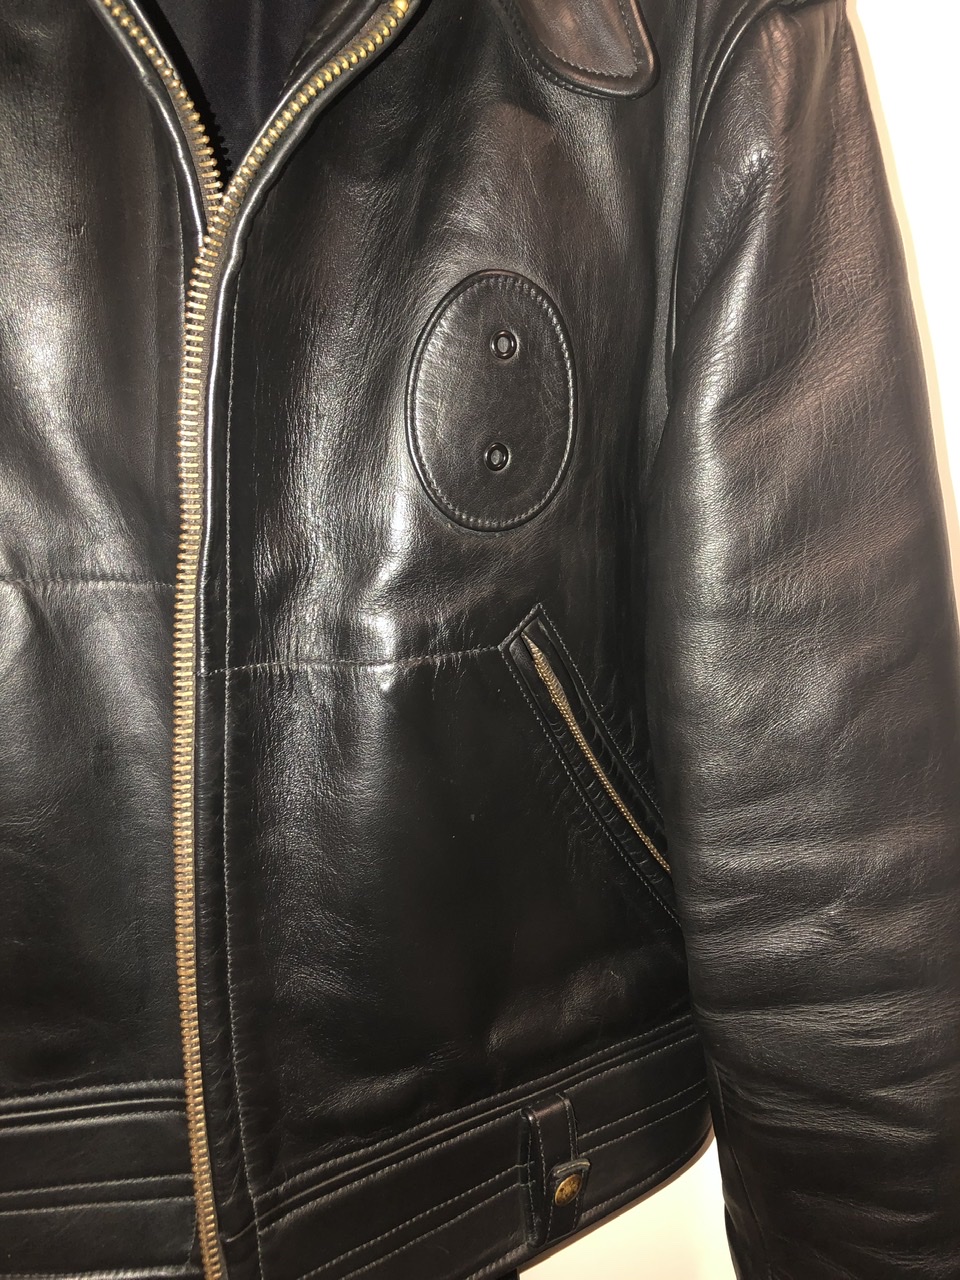 Ultimate Leather Conditioner Comparison, Who Makes The Best Leather Jackets Reddit